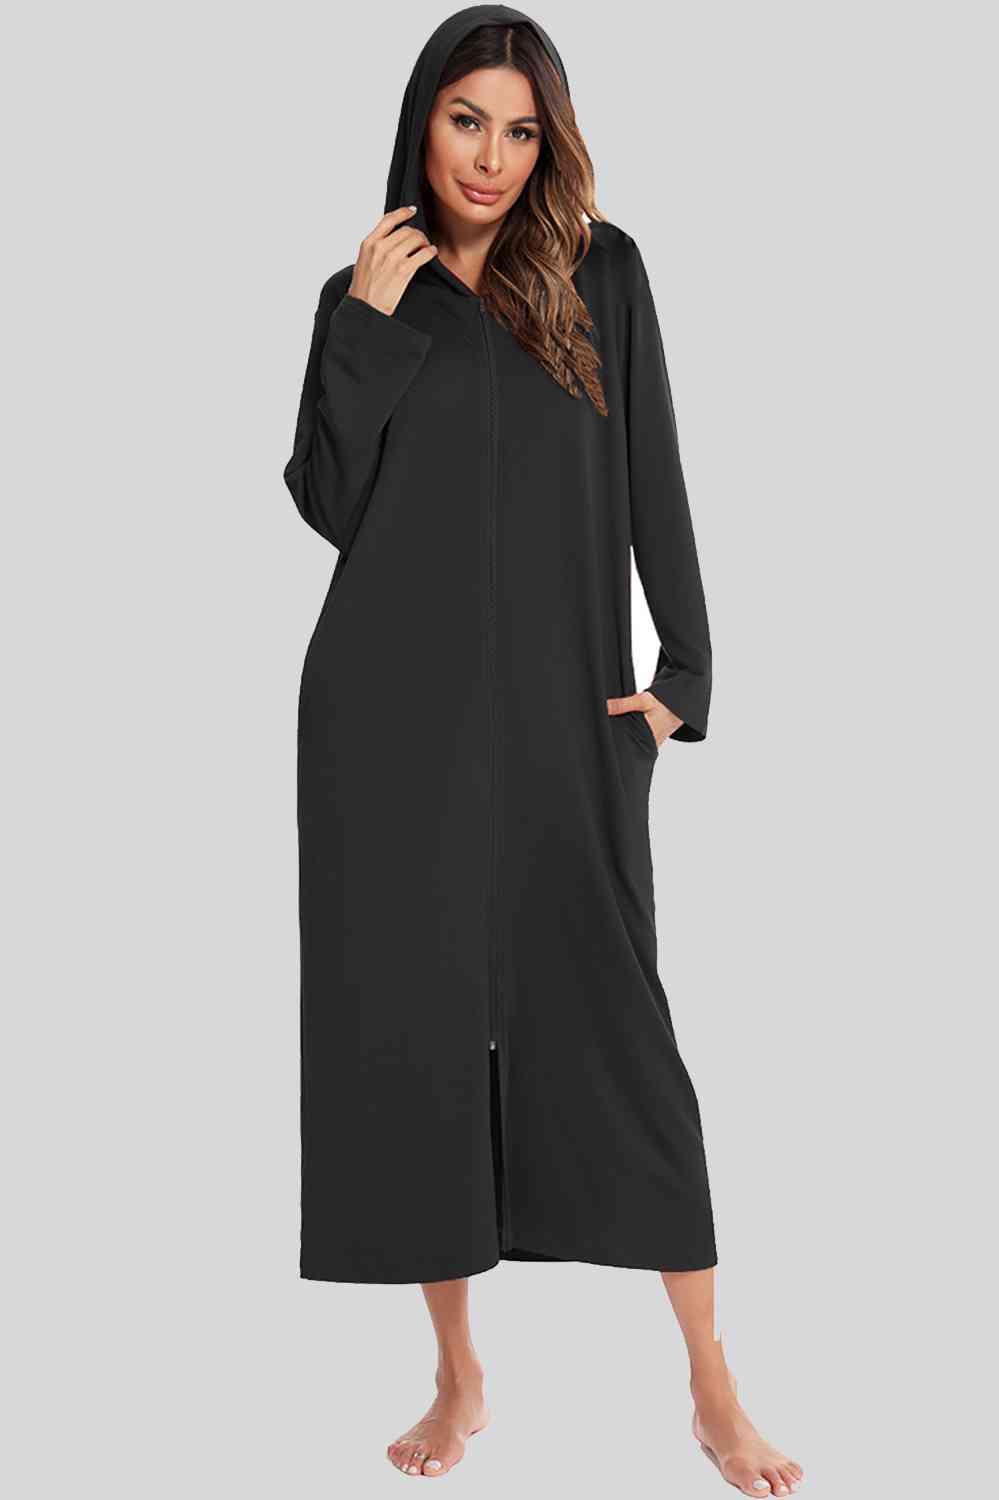 Zip Front Hooded Night Dress with Pockets Black